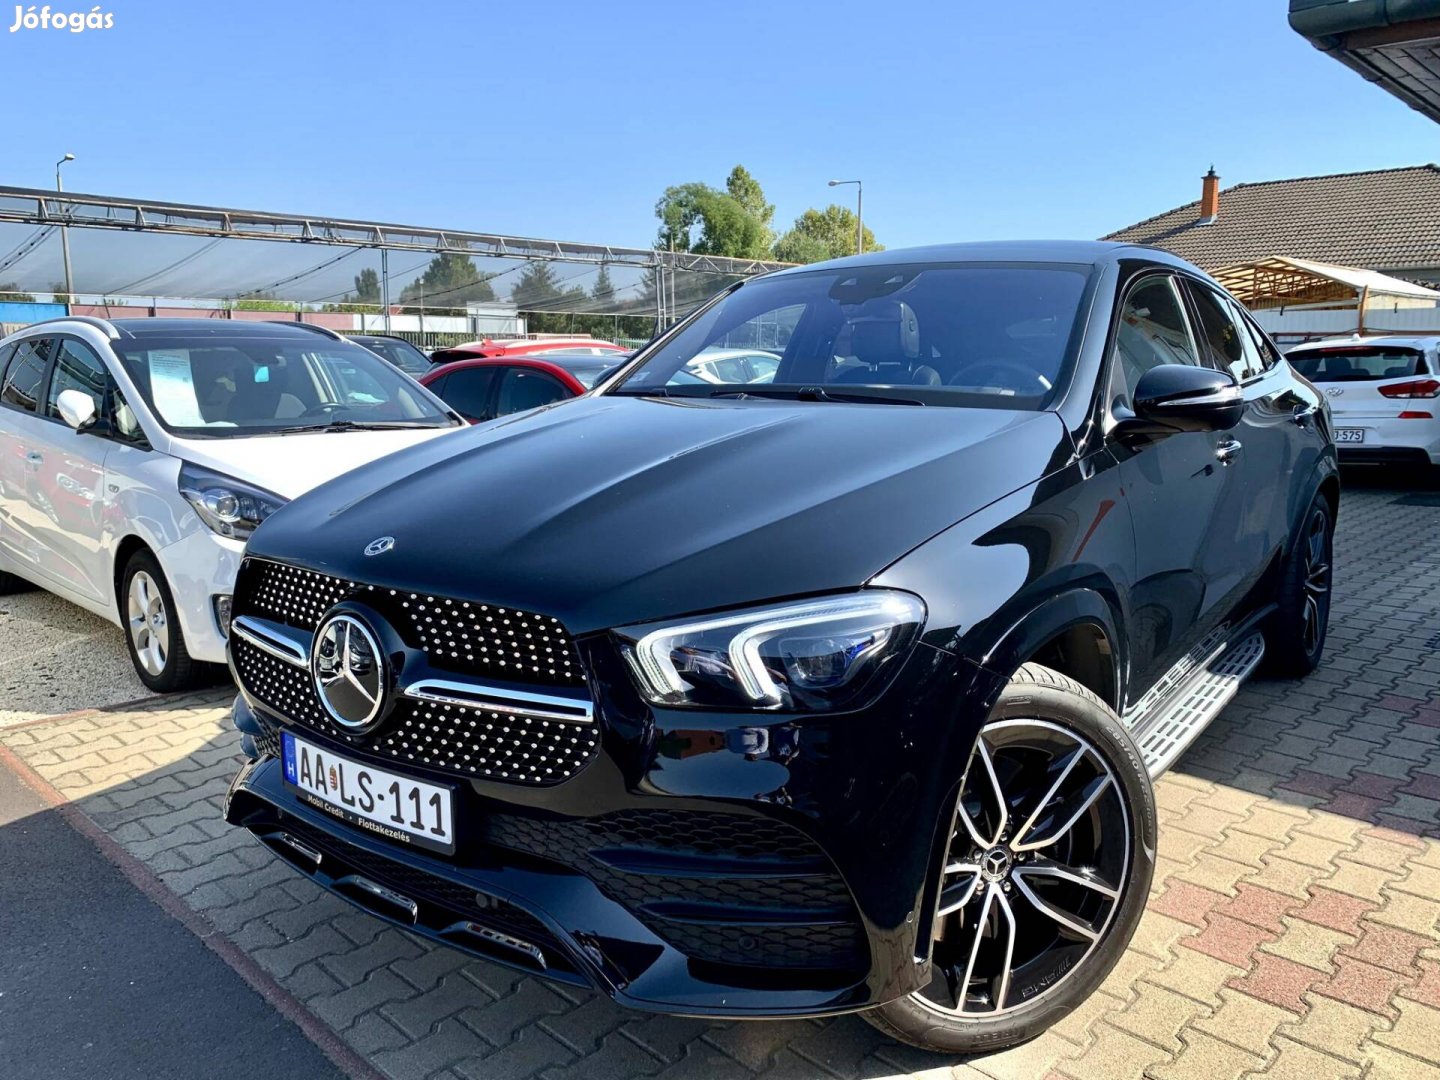 Mercedes-Benz Gle 400 d 4Matic 9G-Tronic Coupe....